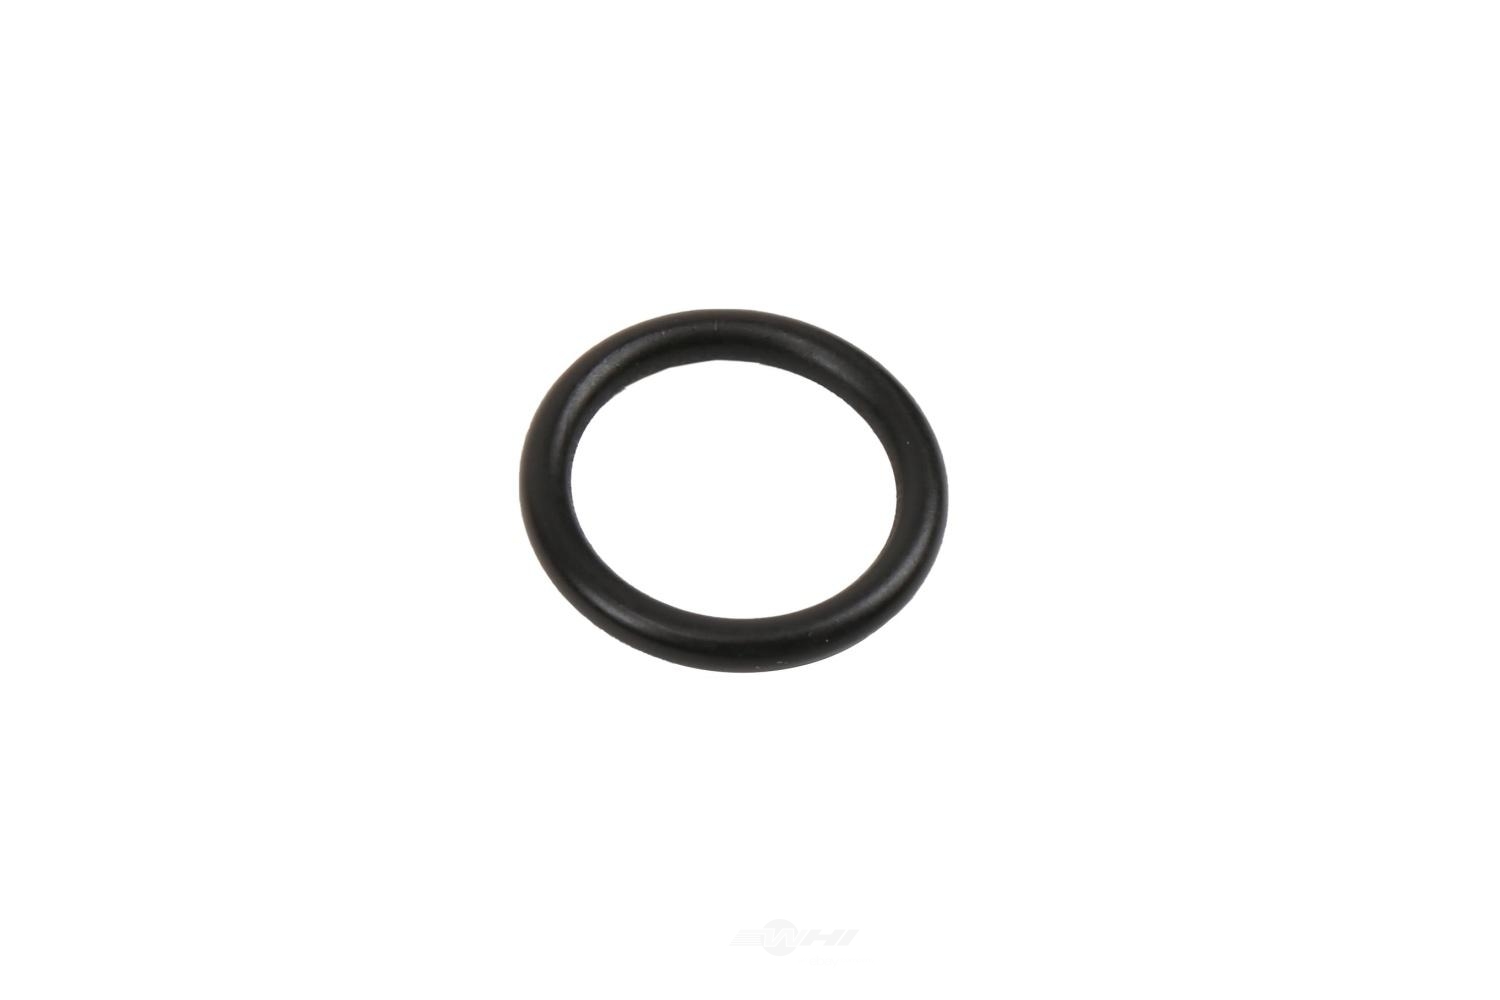 GM GENUINE PARTS - Engine Oil Cooler Line Seal (Inlet) - GMP 55568536